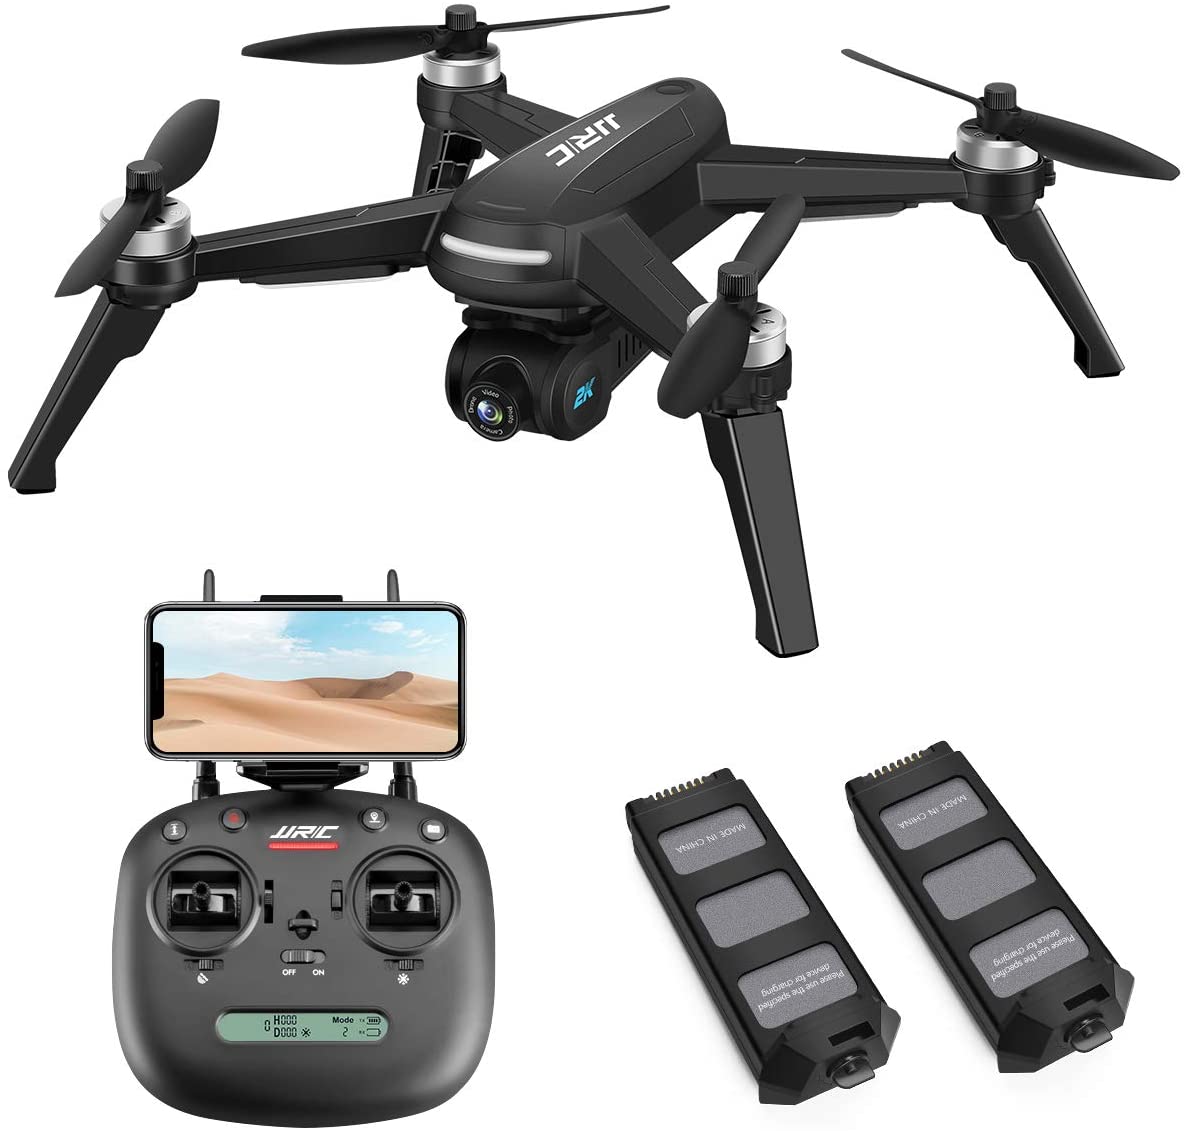 JJRC X5 Brushless Drone 2K Camera WiFi FPV GPS Fixed Height Aerial Photography Drone Quadcopter Black - image 1 of 9